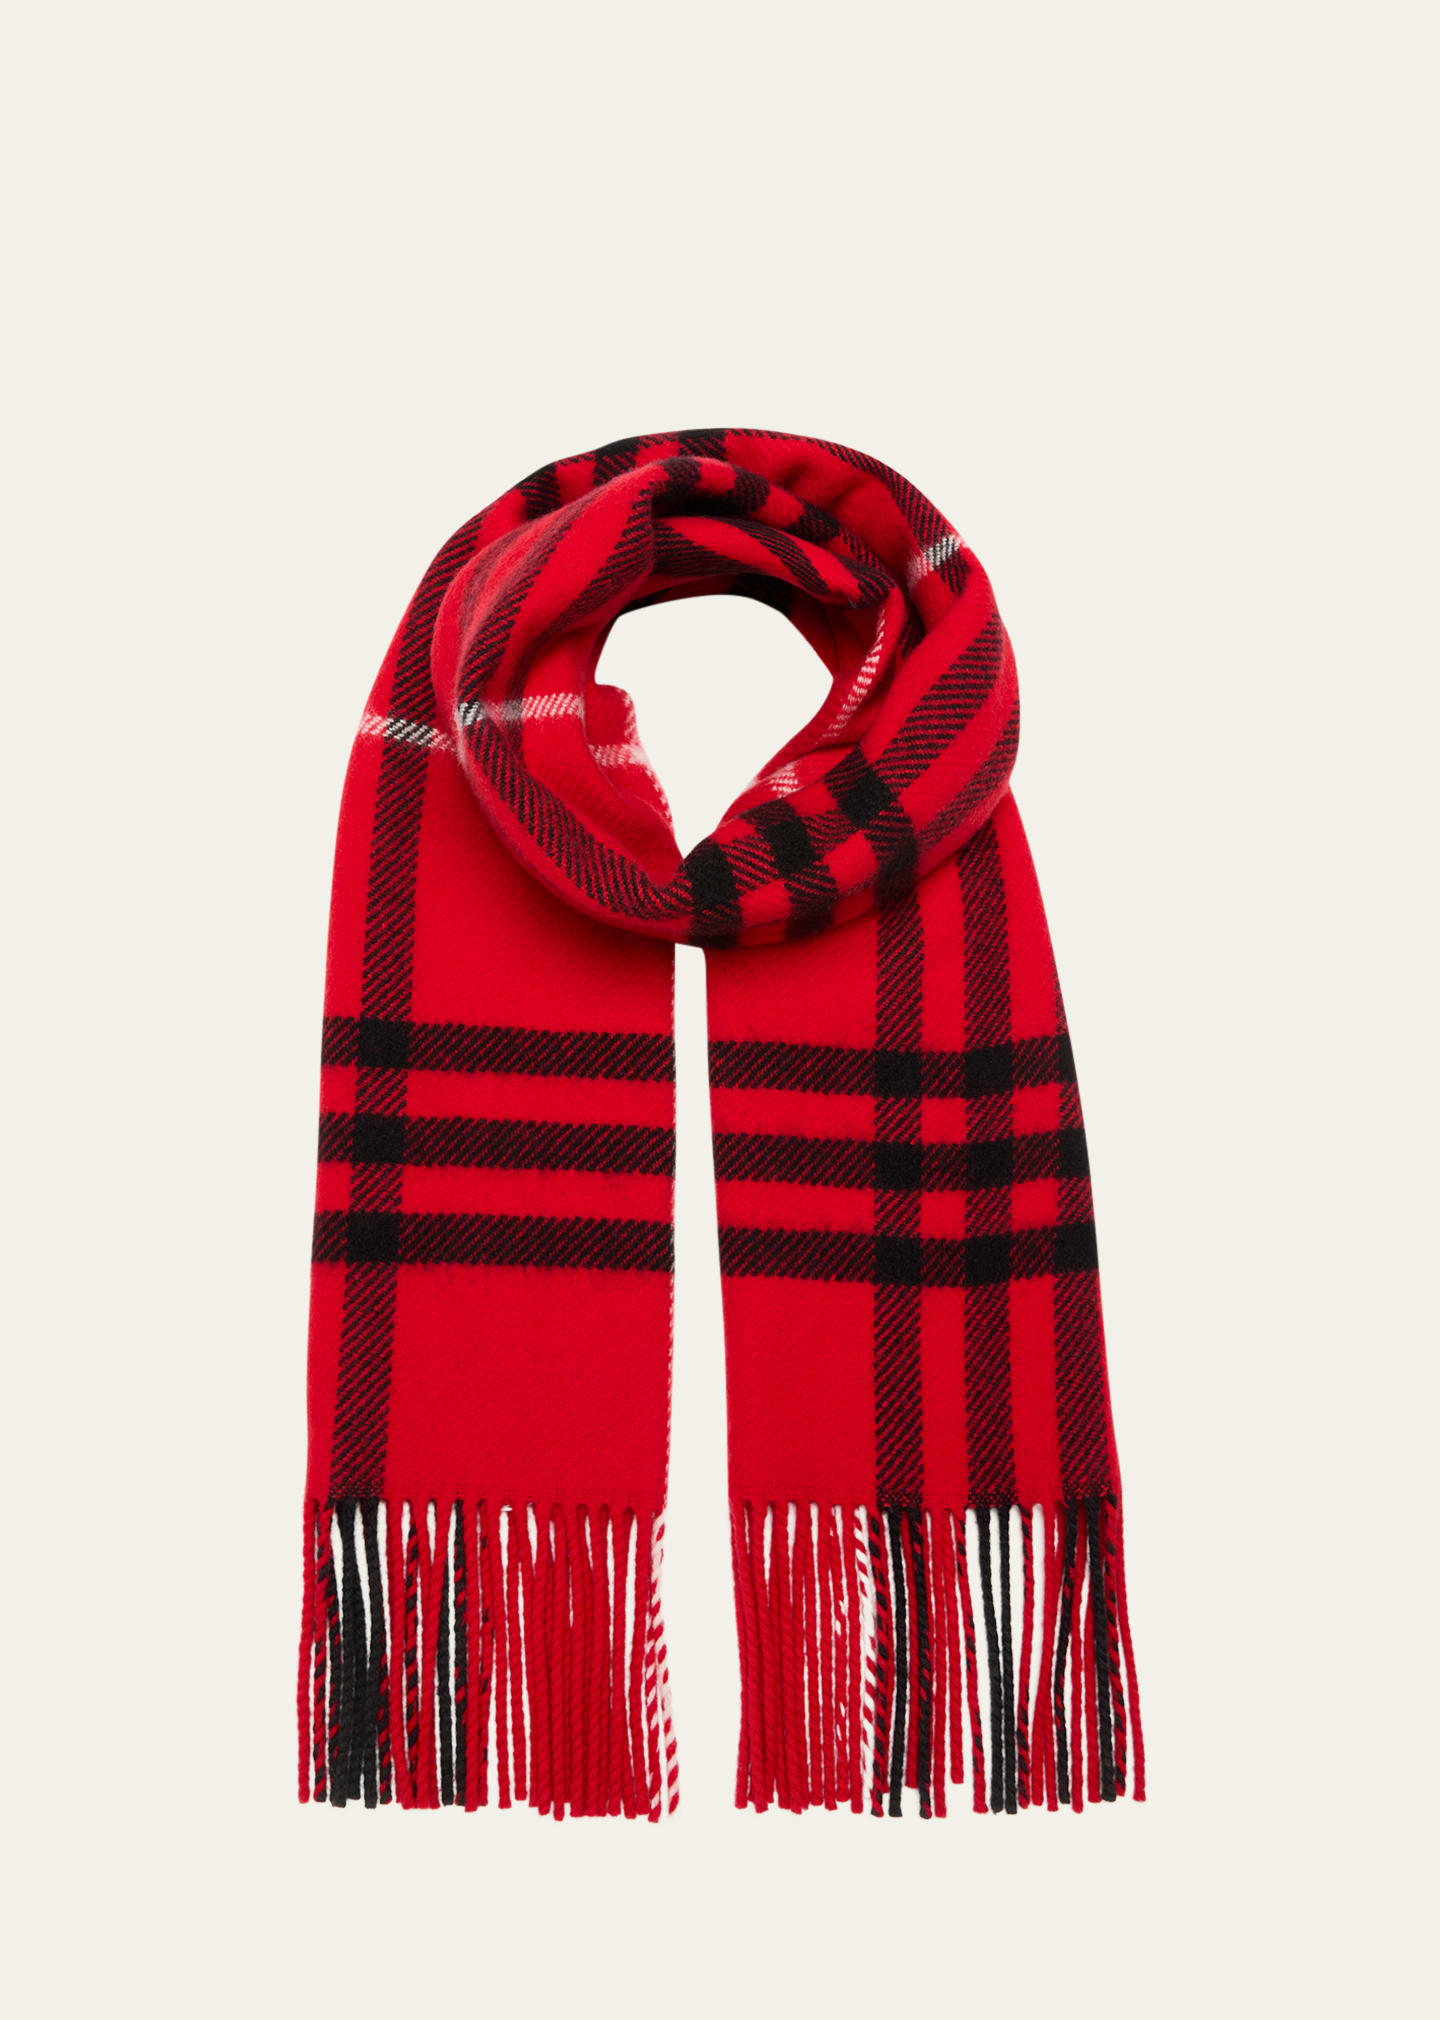 Burberry Wool And Cashmere Check Scarf In Pillar